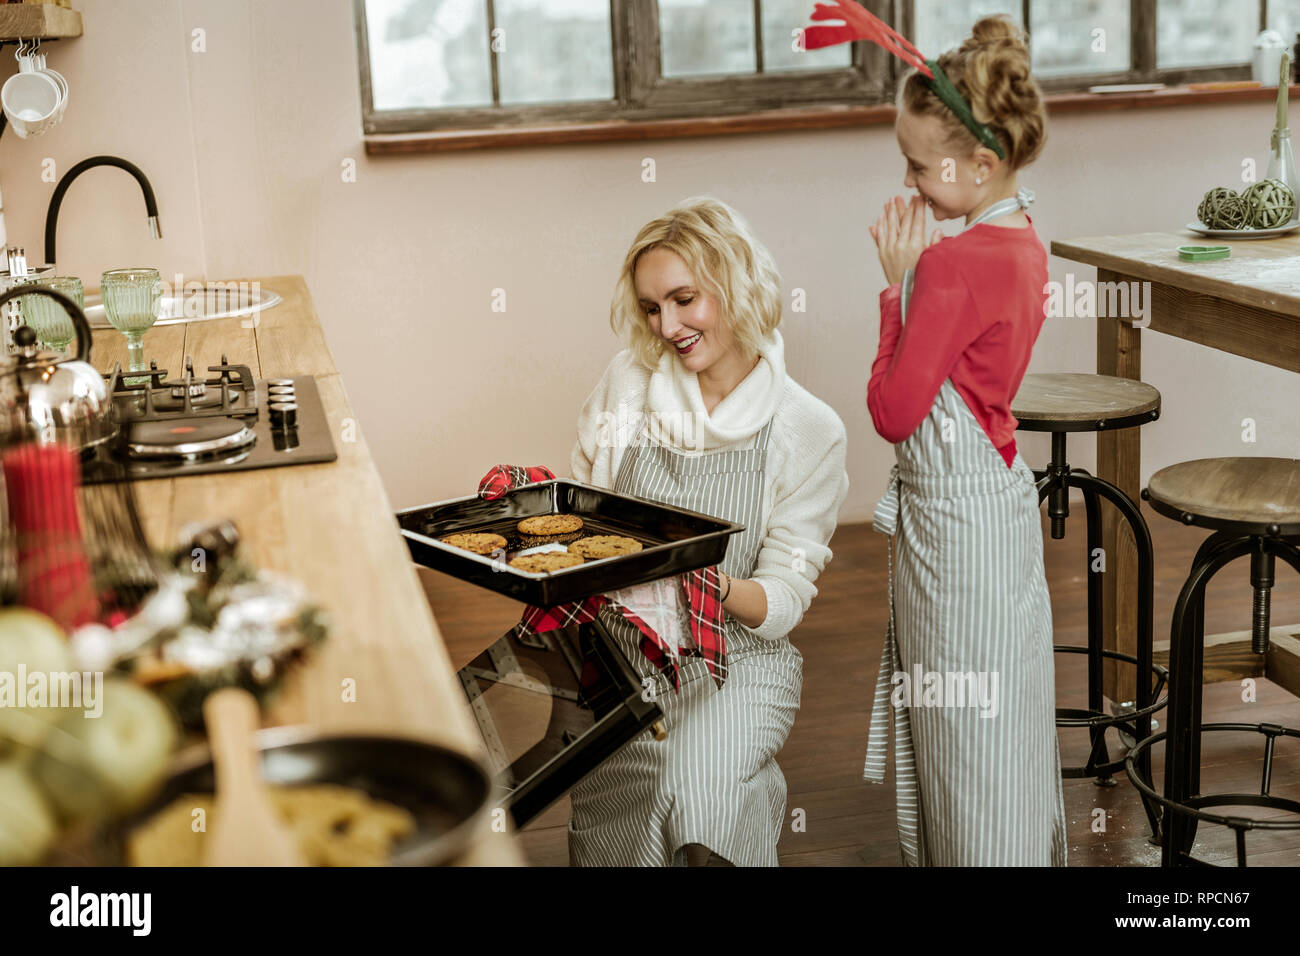 Smiling woman in white sweater controlling her daughter Stock Photo